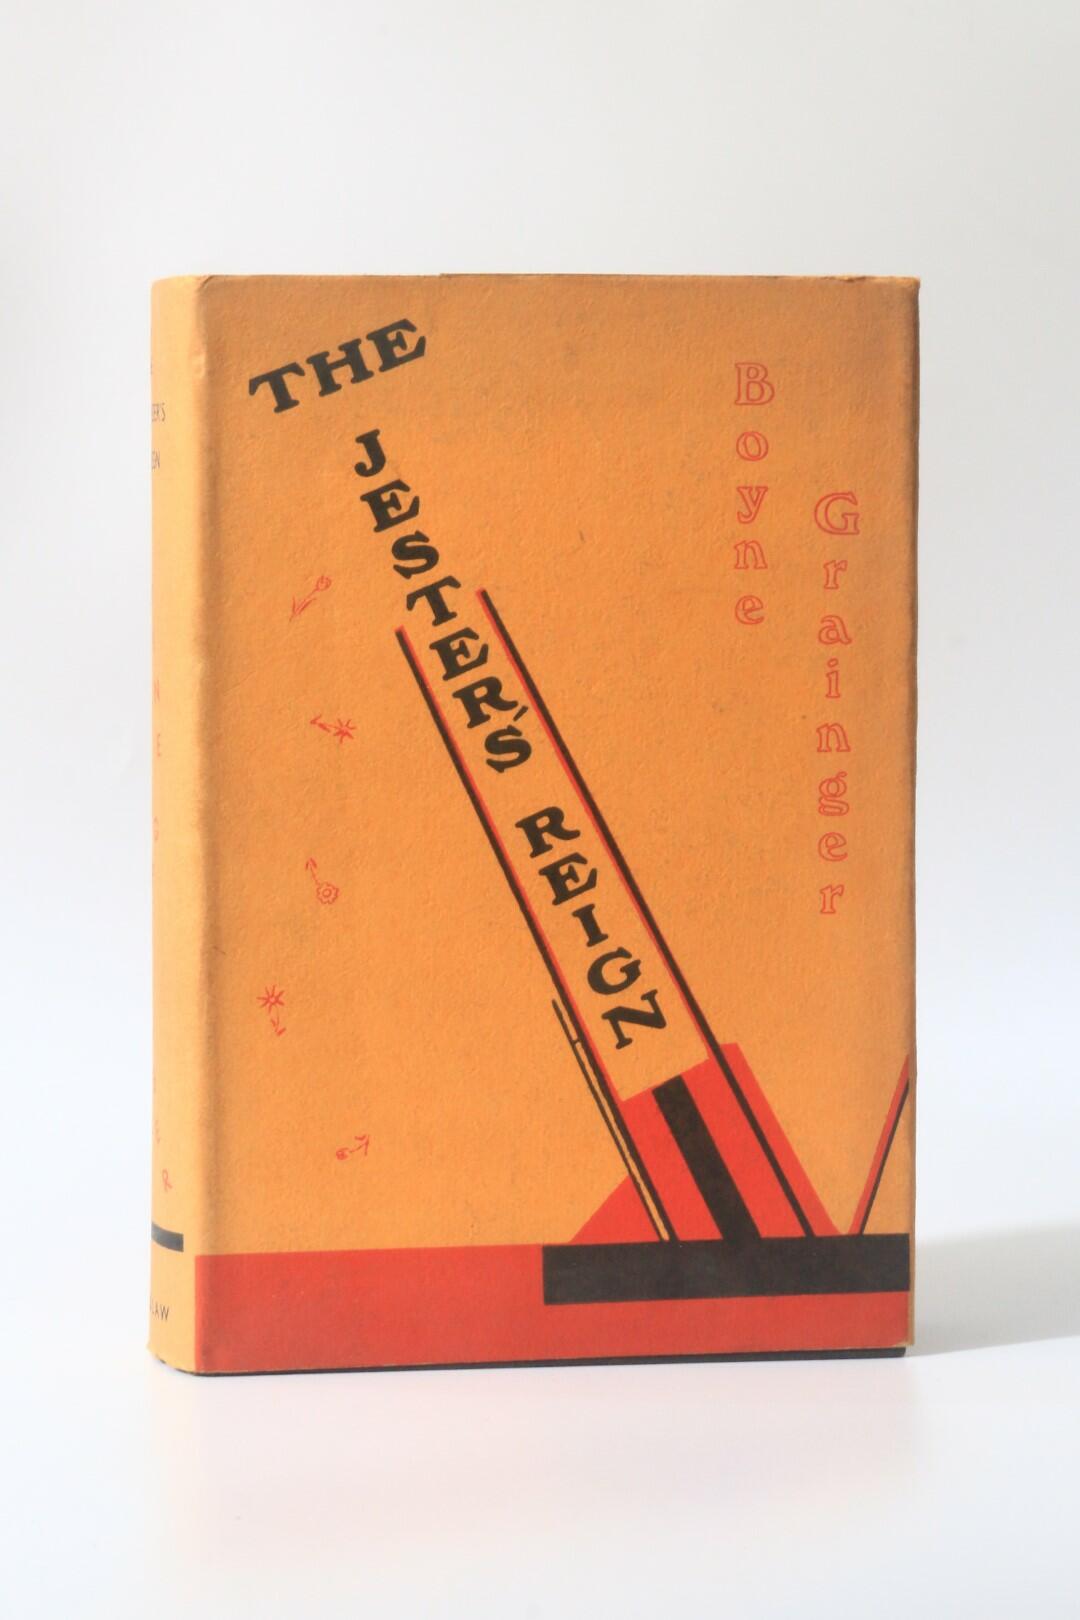 Boyne Grainger - The Jester's Reign - Laidlaw & Butchart, 1939, First Edition.